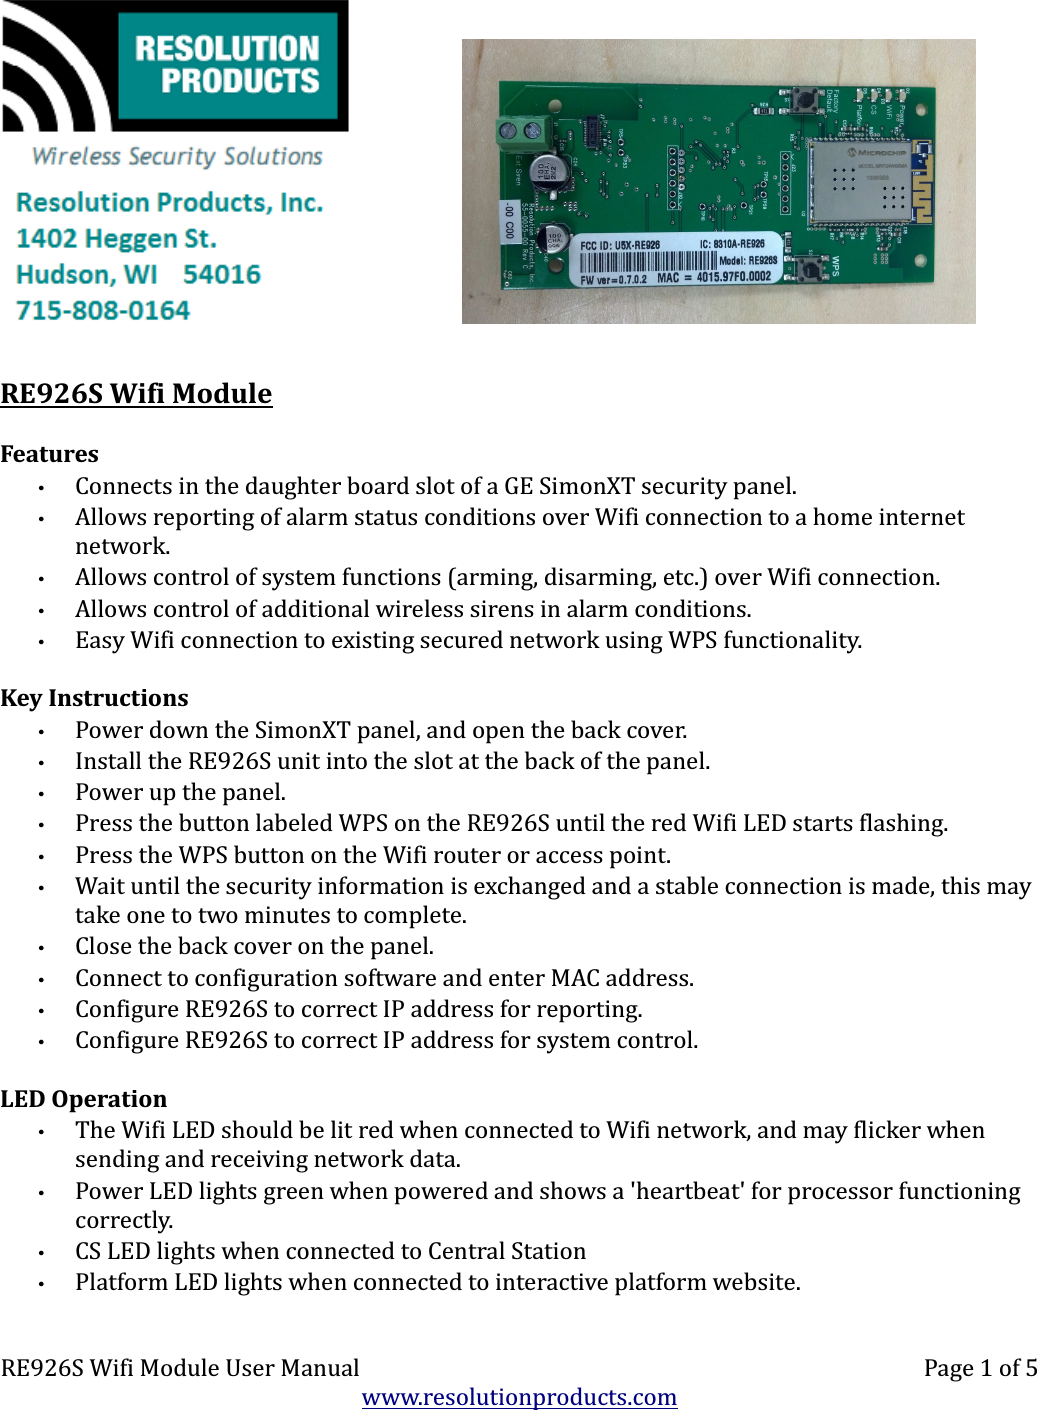    RE926S Wifi ModuleFeatures•Connects in the daughter board slot of a GE SimonXT security panel.•Allows reporting of alarm status conditions over Wifi connection to a home internet network.•Allows control of system functions (arming, disarming, etc.) over Wifi connection.•Allows control of additional wireless sirens in alarm conditions.•Easy Wifi connection to existing secured network using WPS functionality.Key Instructions•Power down the SimonXT panel, and open the back cover.•Install the RE926S unit into the slot at the back of the panel.•Power up the panel.•Press the button labeled WPS on the RE926S until the red Wifi LED starts flashing.•Press the WPS button on the Wifi router or access point.•Wait until the security information is exchanged and a stable connection is made, this may take one to two minutes to complete.•Close the back cover on the panel.•Connect to configuration software and enter MAC address.•Configure RE926S to correct IP address for reporting.•Configure RE926S to correct IP address for system control.LED Operation•The Wifi LED should be lit red when connected to Wifi network, and may flicker when sending and receiving network data.•Power LED lights green when powered and shows a &apos;heartbeat&apos; for processor functioning correctly.•CS LED lights when connected to Central Station•Platform LED lights when connected to interactive platform website.RE926S Wifi Module User Manual Page 1 of 5www.resolutionproducts.com